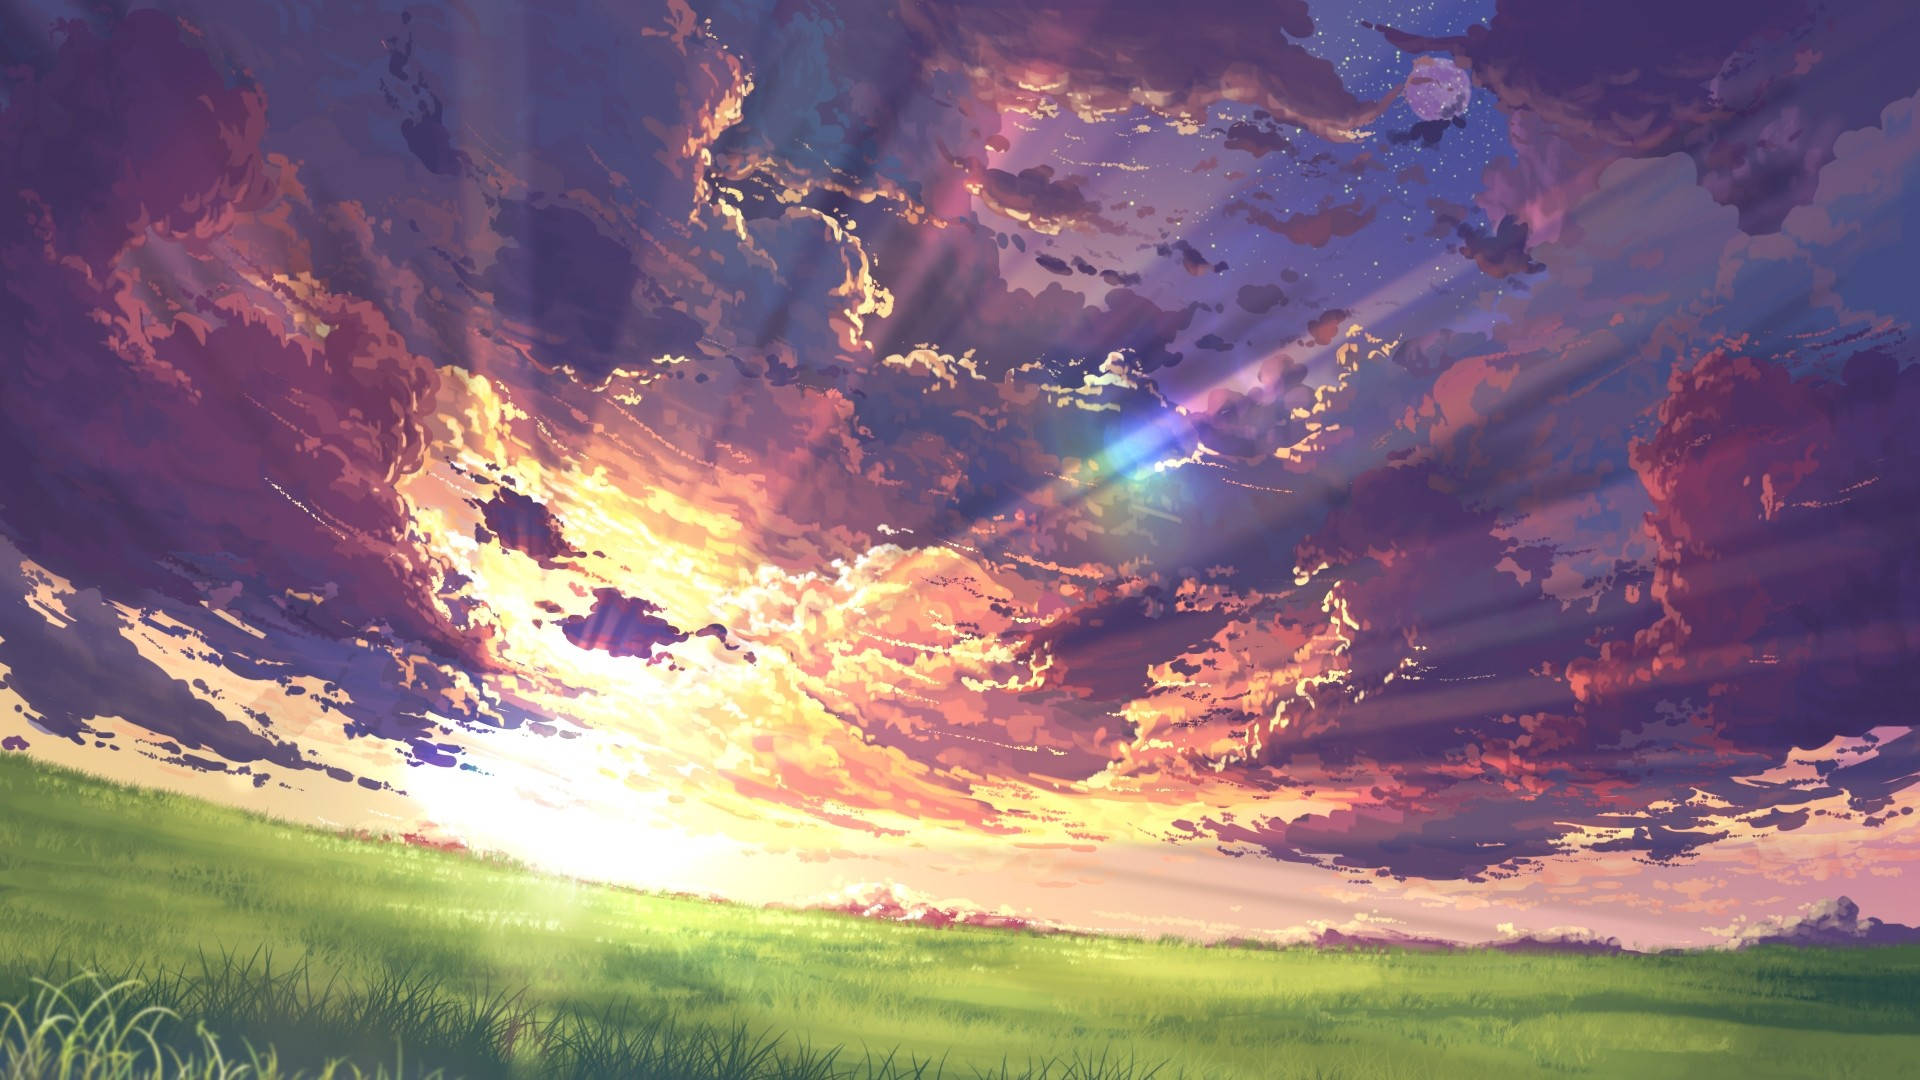 Anime Girl Watching The Sunset Photo | JPG Free Download - Pikbest